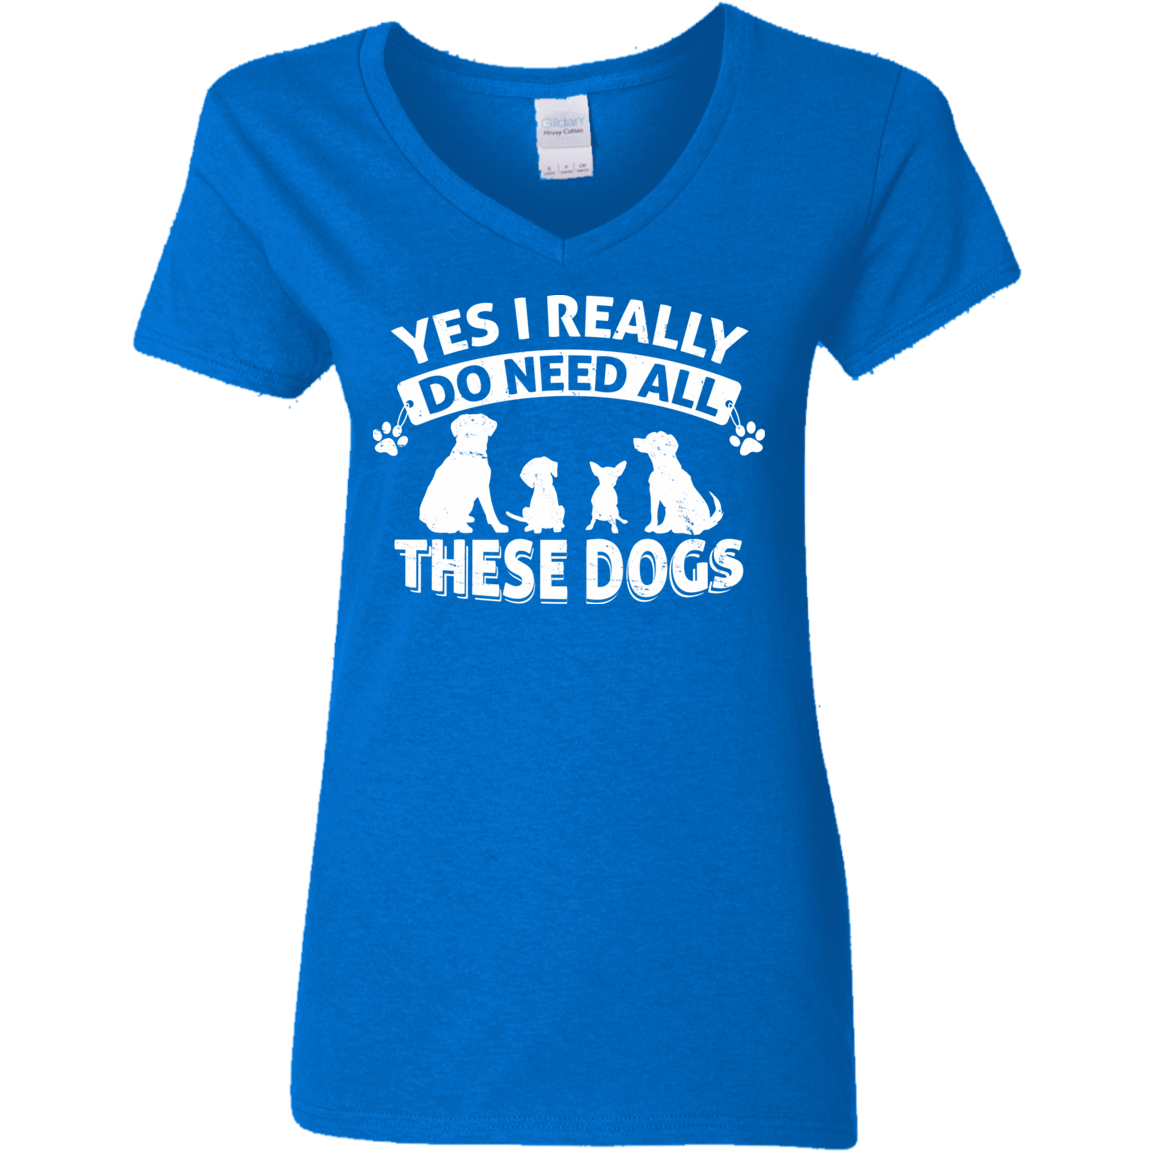 Yes I Do Need All These Dogs - Ladies V Neck.